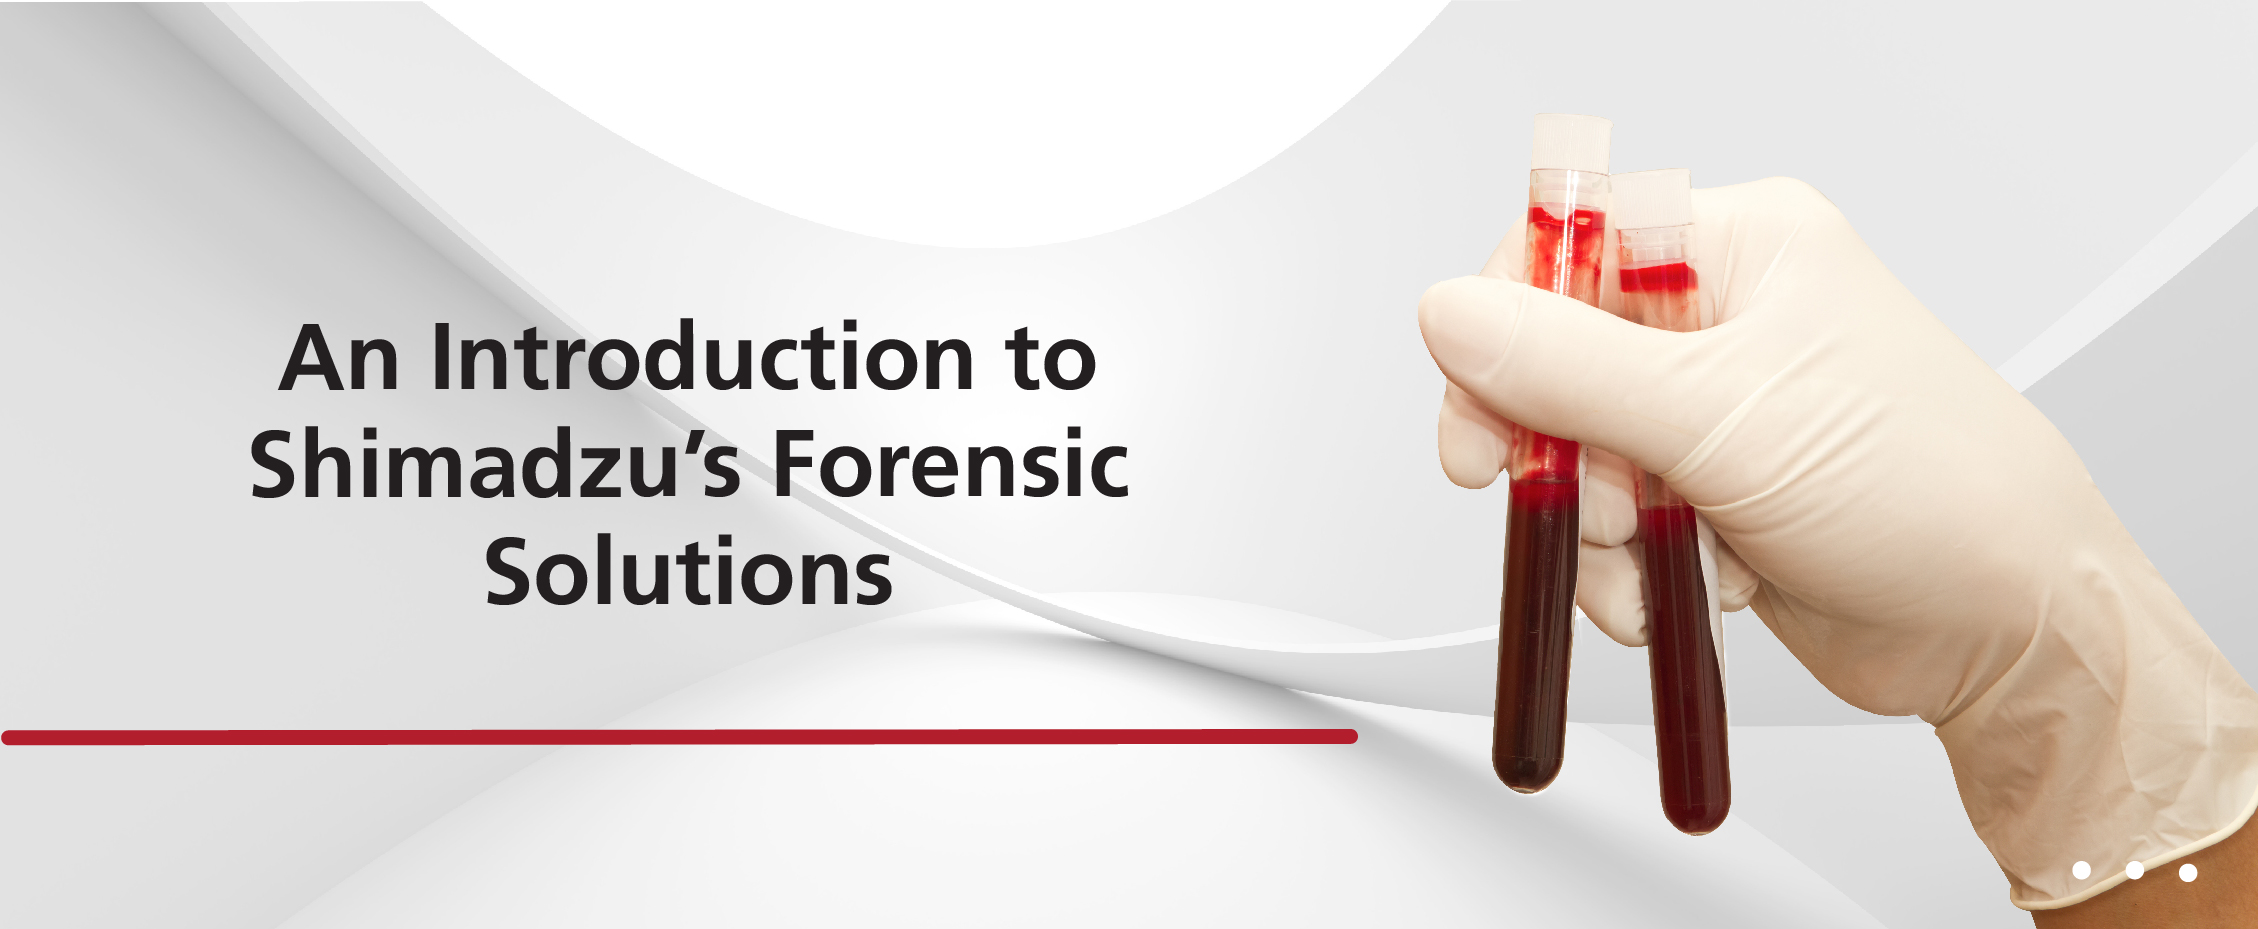 An Introduction to Shimadzu's Forensic Solutions